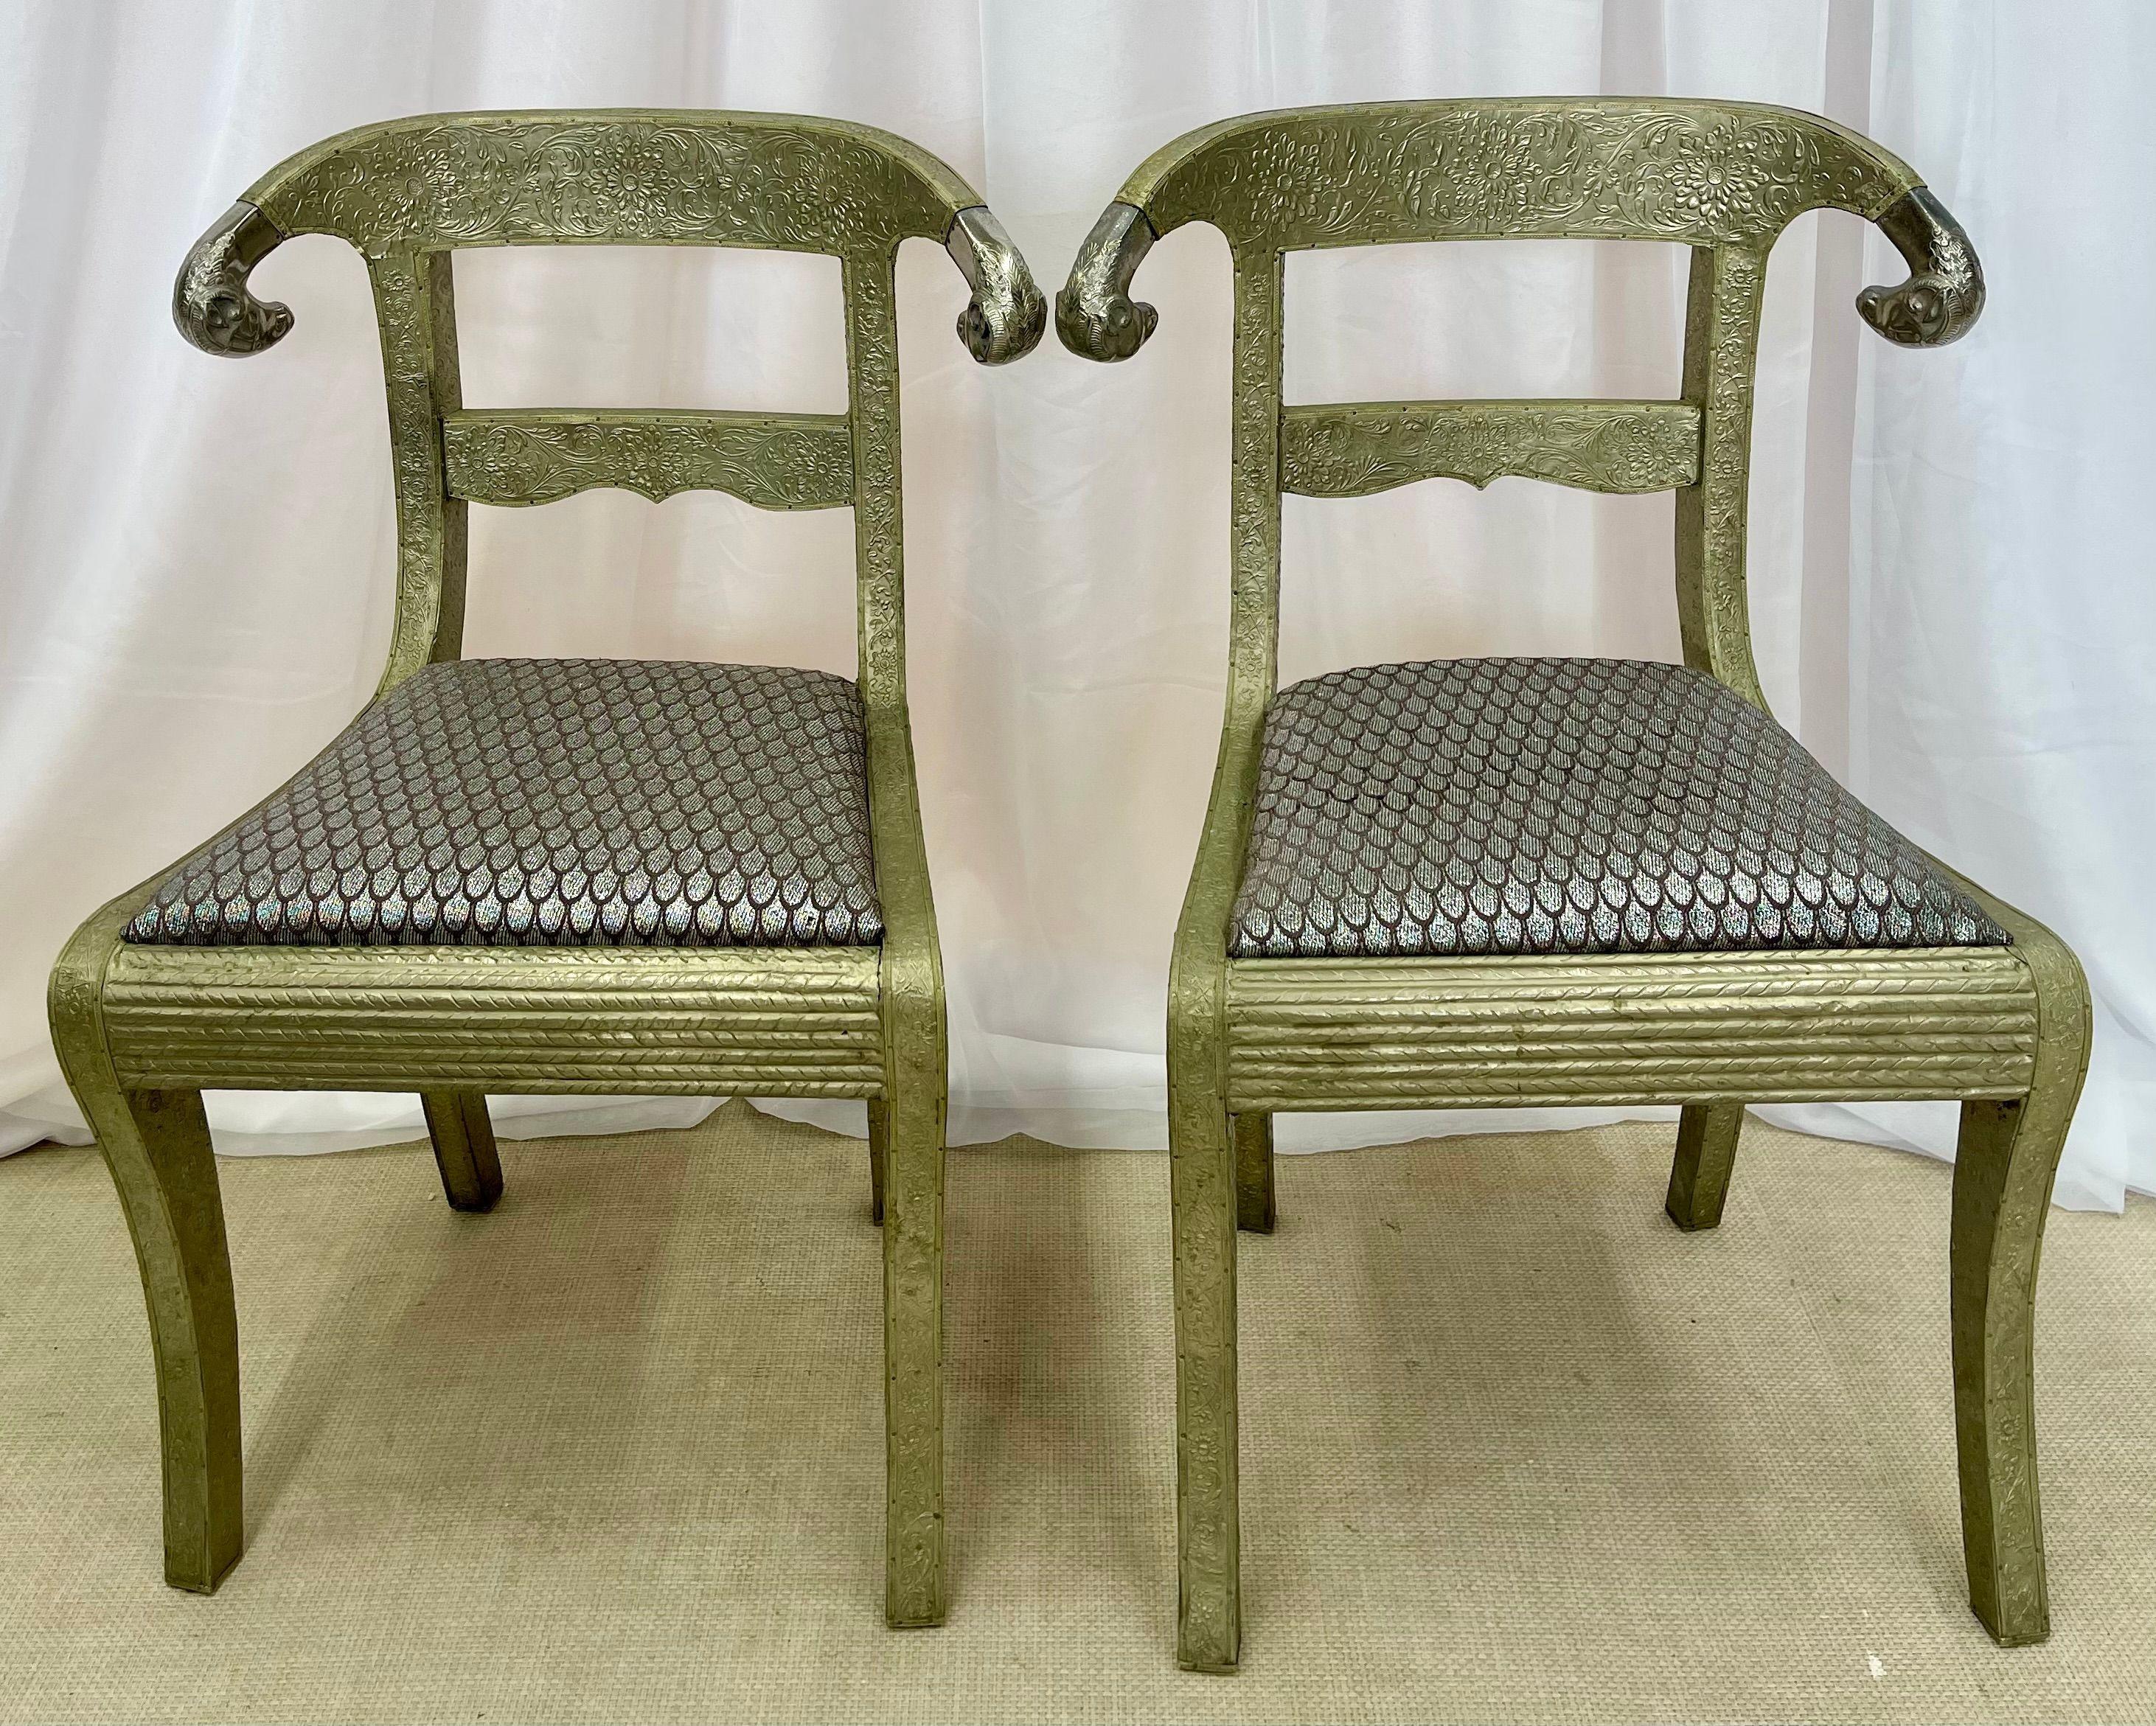 Pair of Gustavian or Neoclassical side chairs can be used in any room. Each having fully metal wrapped frames with Finely carved rams heads on the back rests. The finely wrapped metal frames with rose, vine and leaf design tacked securely upon the